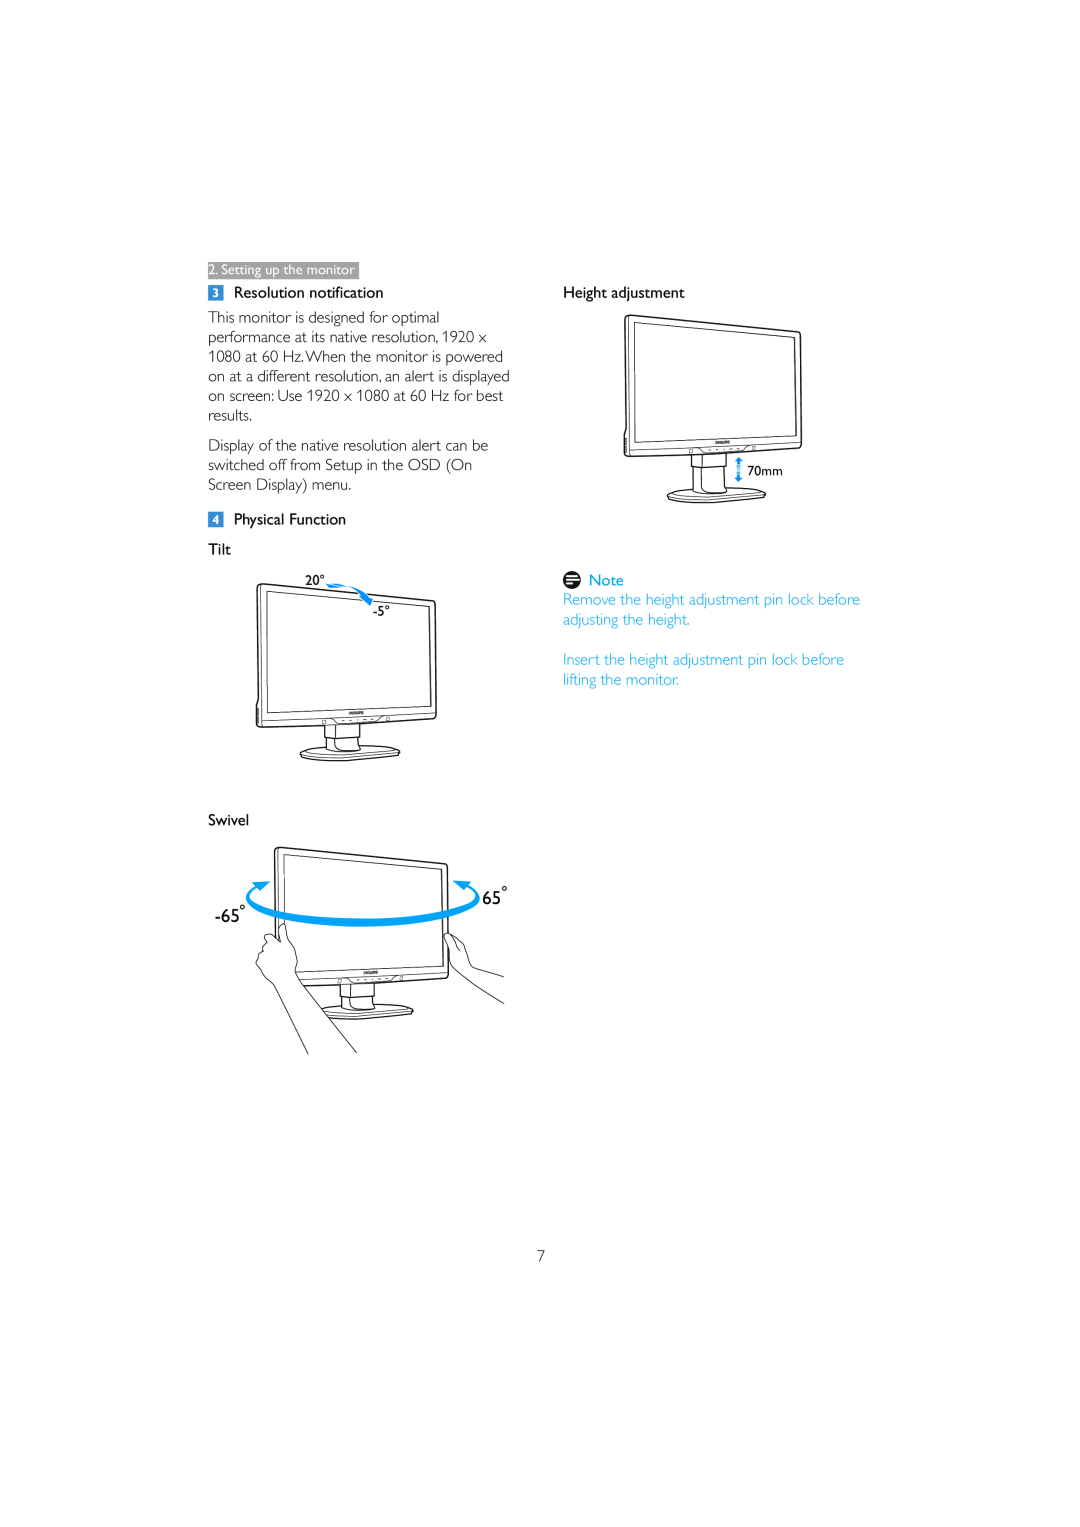 Philips 221B3 user manual Remove the height adjustment pin lock before adjusting the height, Resolution notification 